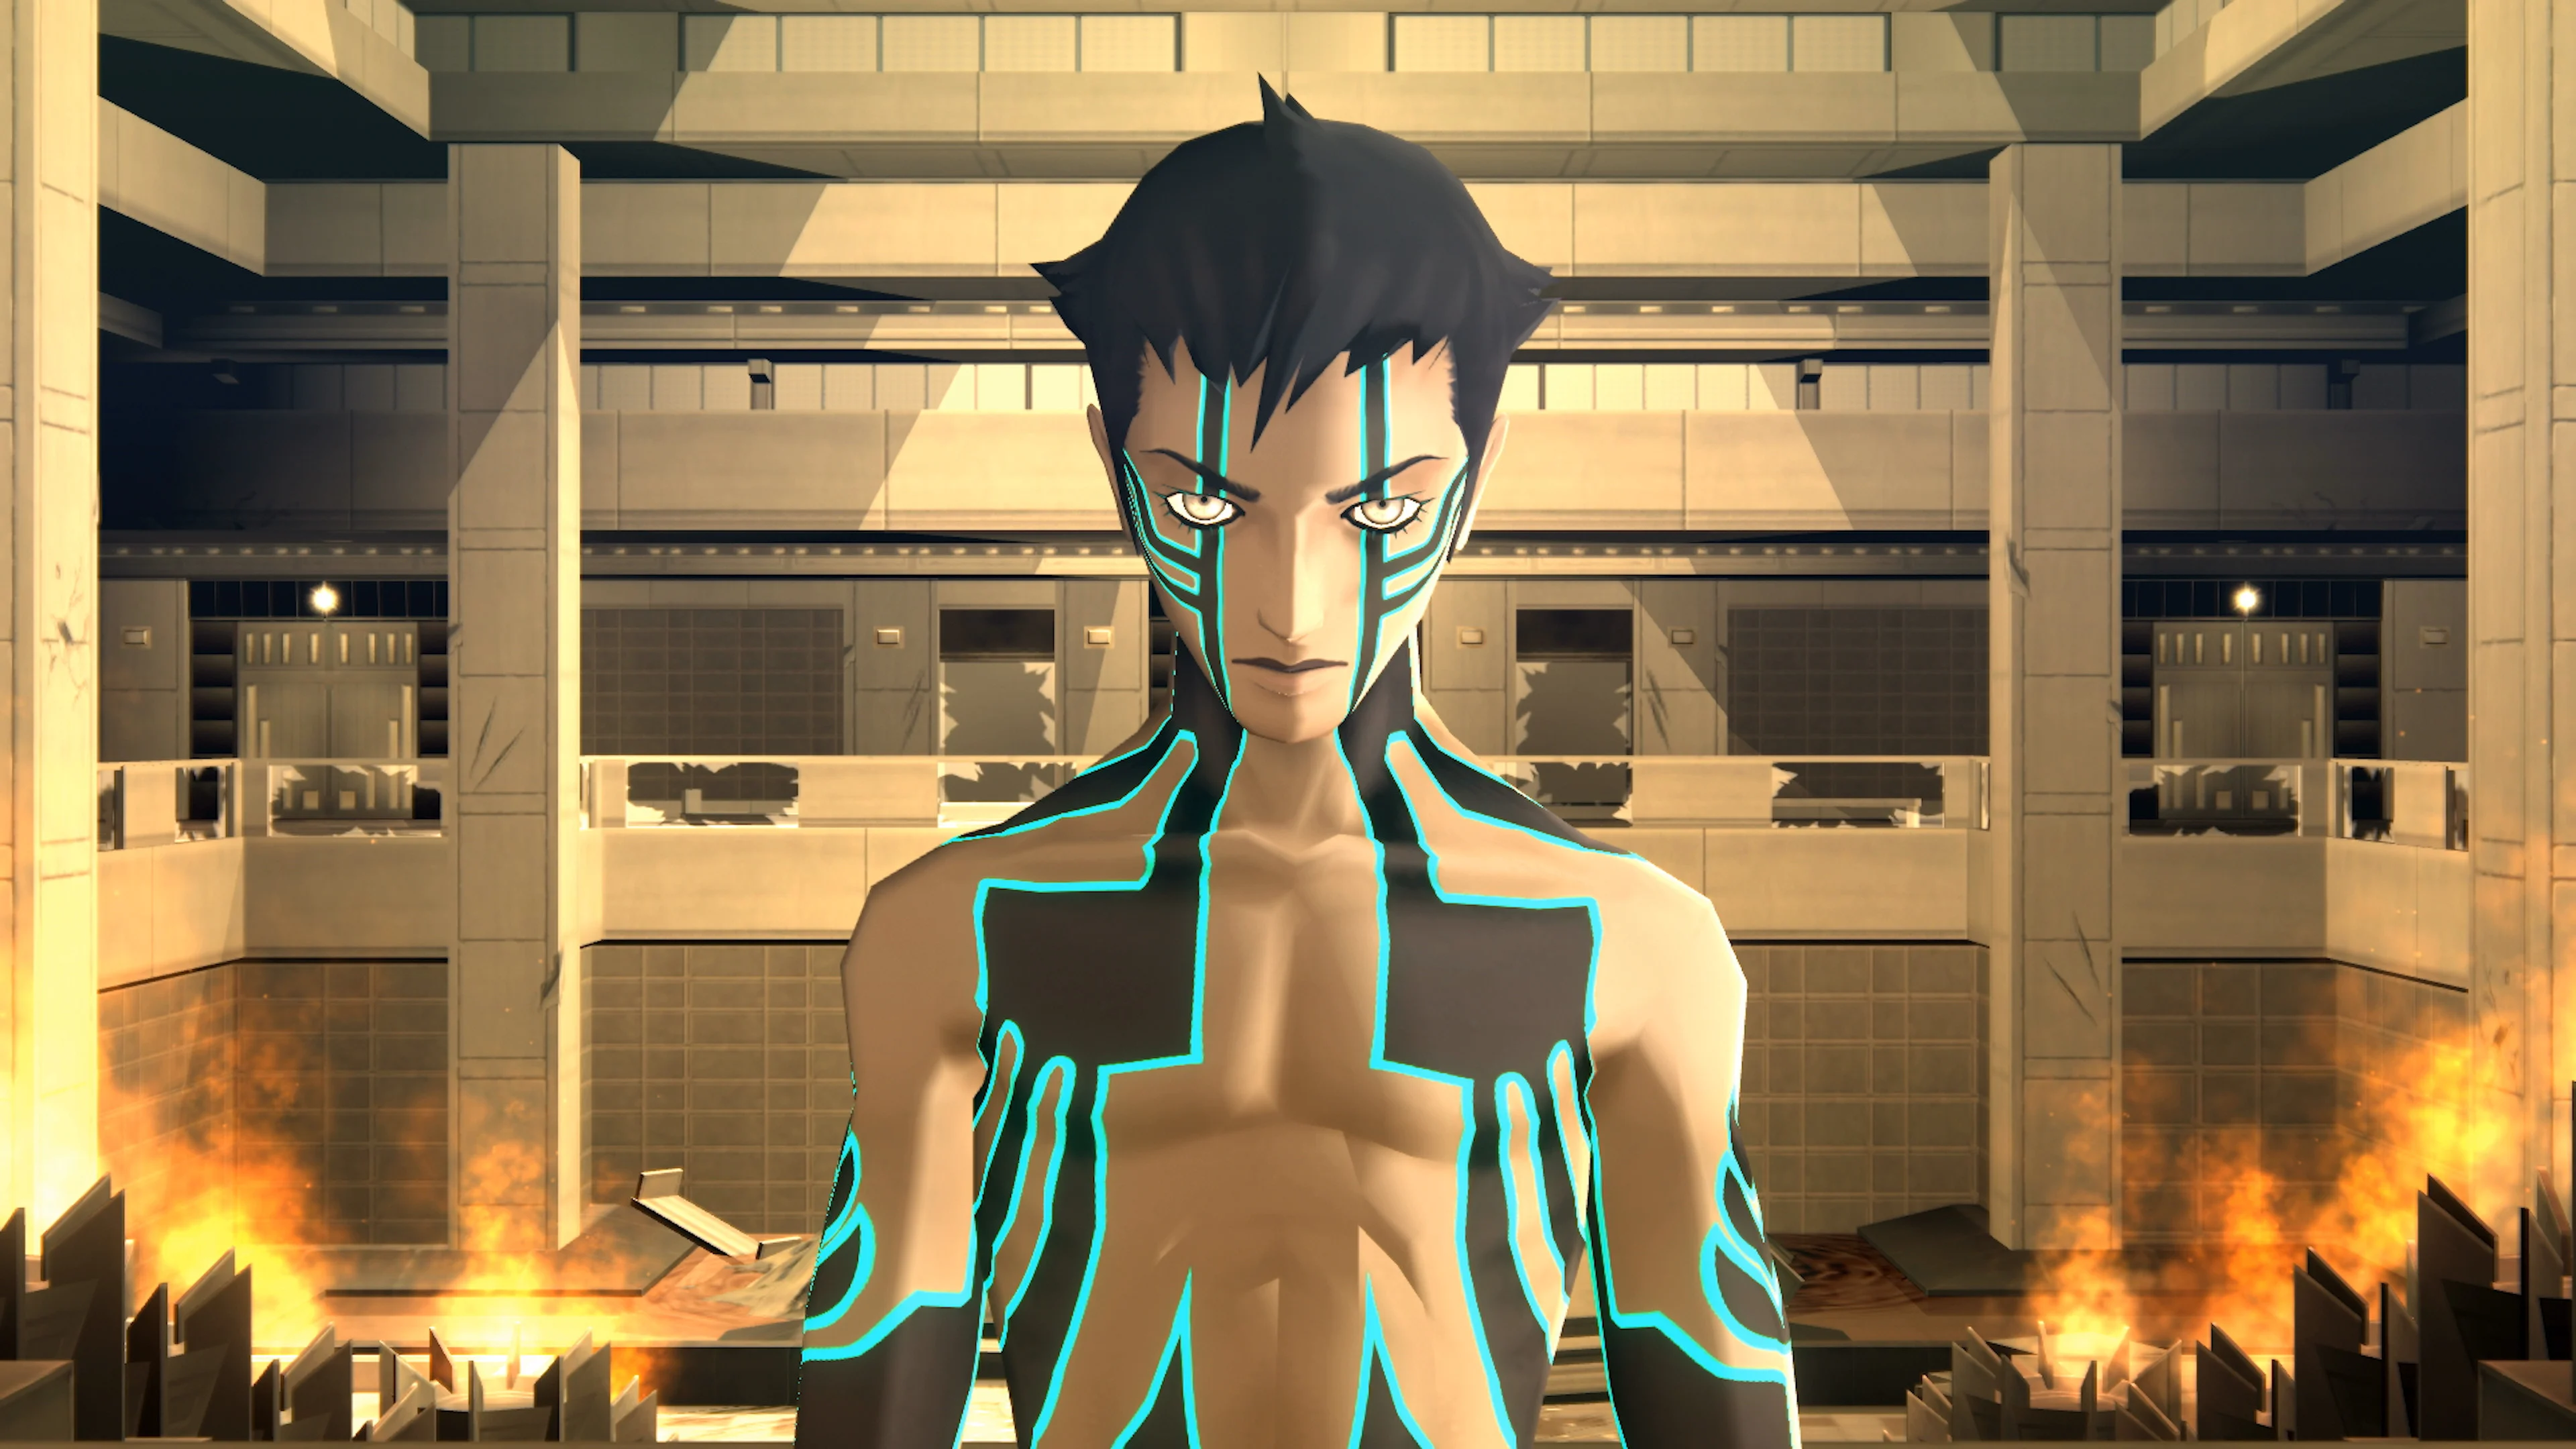 A commonly used image of the main character of Shin Megami Tensei 3: Nocturn, shirtless and covered in glowing blue and black linear tattoos, staring out at the camera from what appears to be a hospital hallway. The edges of the screen are aflame, and glass hand railings behind the M C have been shattered. The Protag has a blank expression despite the ruinous surroundings.